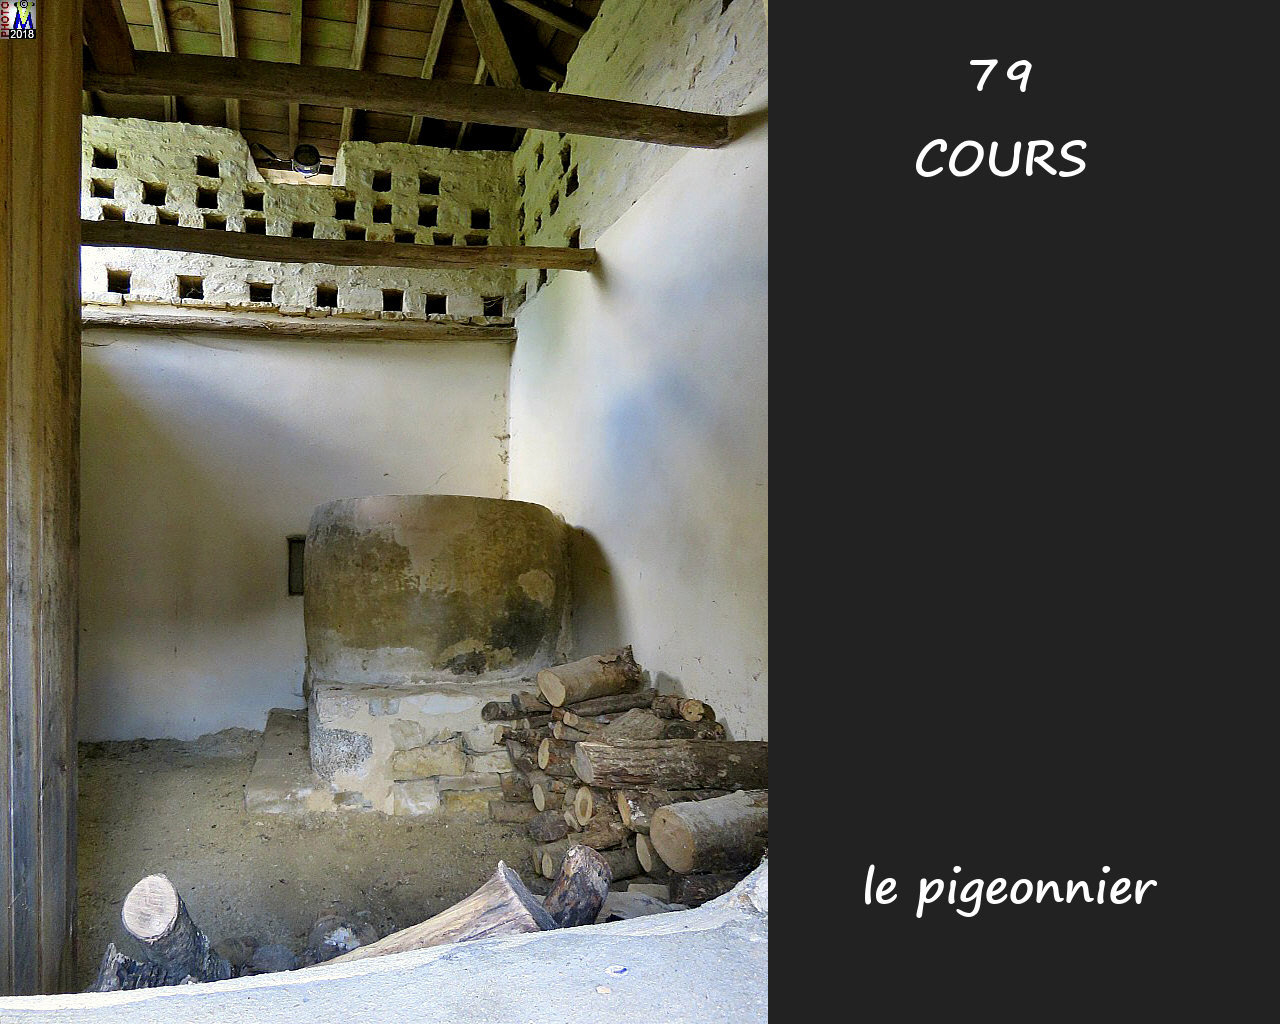 79COURS_pigeonnier_1002.jpg